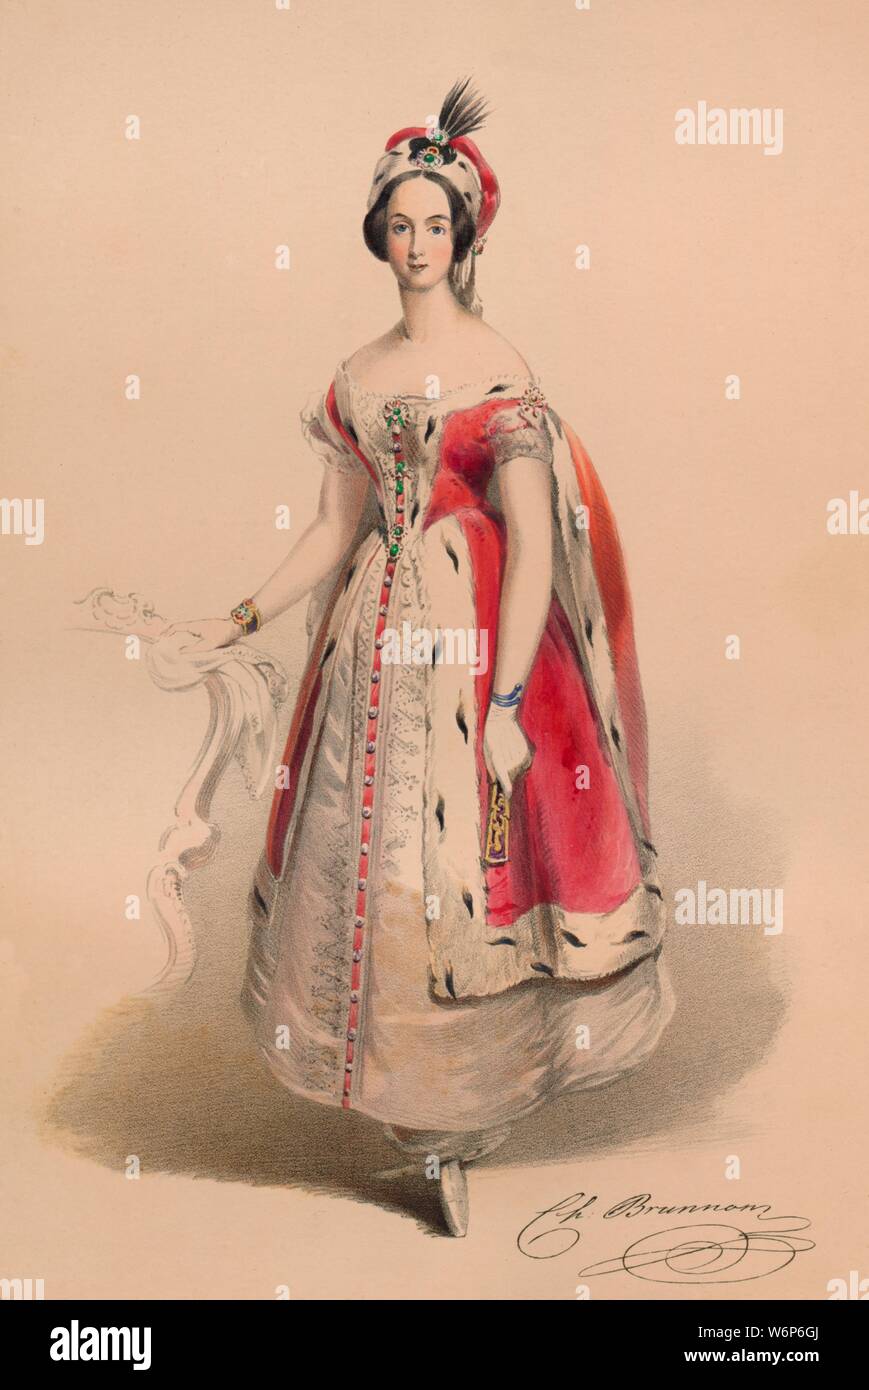 Guest in costume for Queen Victoria's Bal Costum&#xe9;, May 12 1842, (1843). Woman, possibly Charlotte de Brunnon, in an ermine-trimmed outfit with matching headdress. Members of the Royal Household were expected to wear dress of the Plantagenet period (c1154-1485), although other guests could wear costumes of their own choosing. The costumes were designed under the supervision of James Robinson Planch&#xe9; and were specifically intended to give work to the declining Spitalfields silk industry. The ball of 1842, held at Buckingham Palace in London, was the first of three costume balls held by Stock Photo